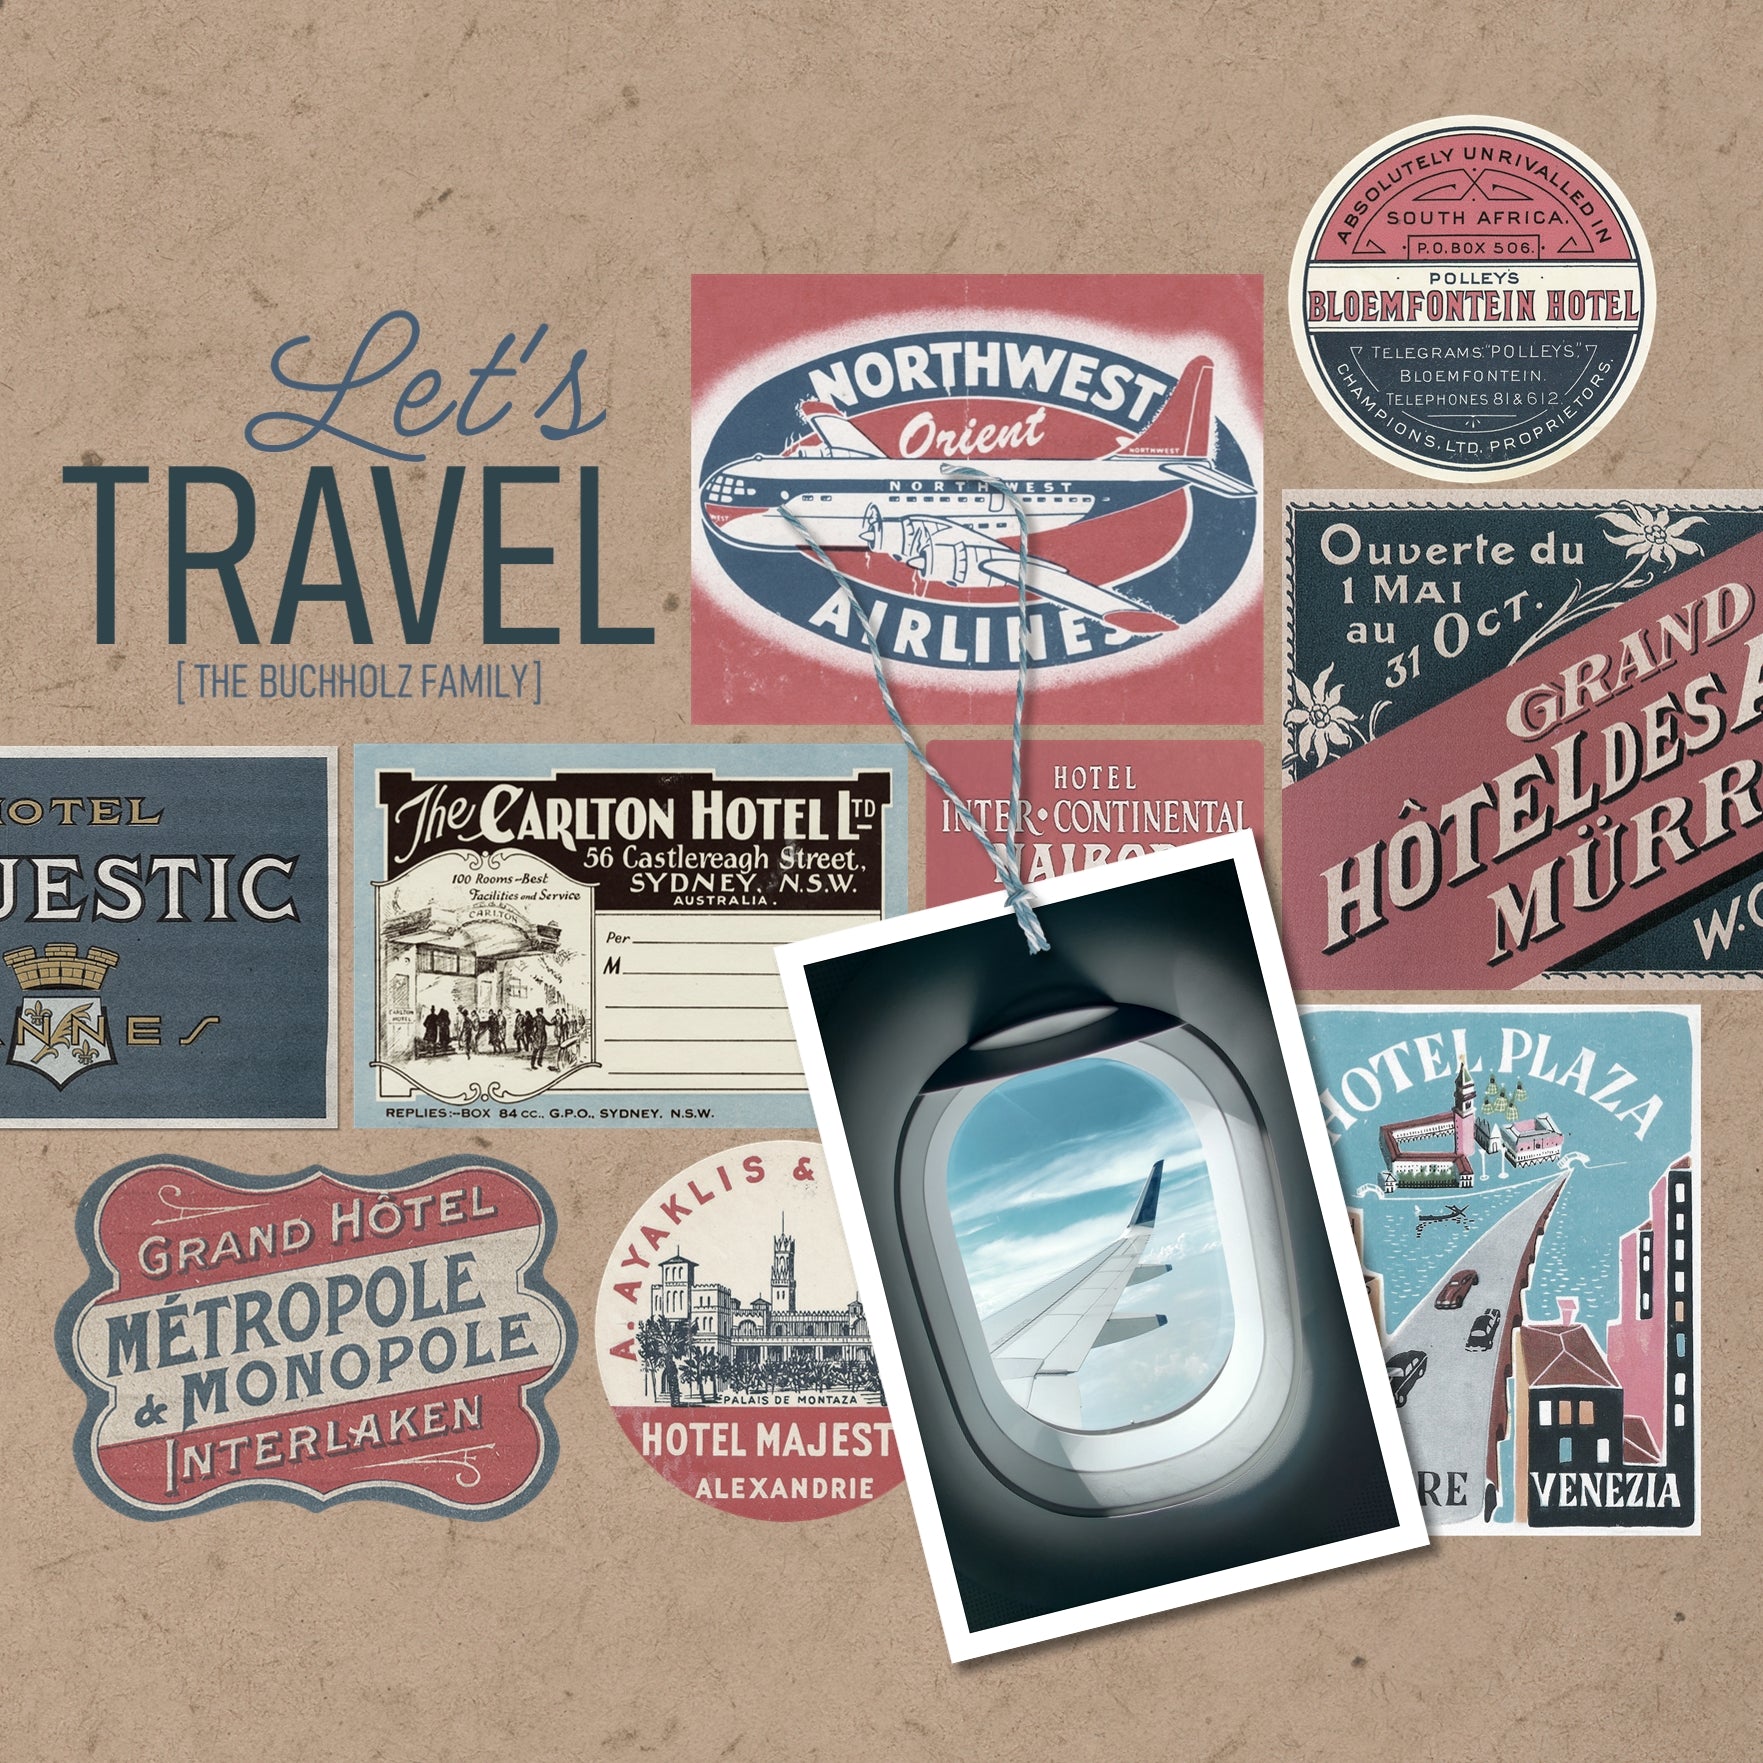 This digital art collection of vintage hotel luggage labels from around the world is the perfect addition to any travel pages.